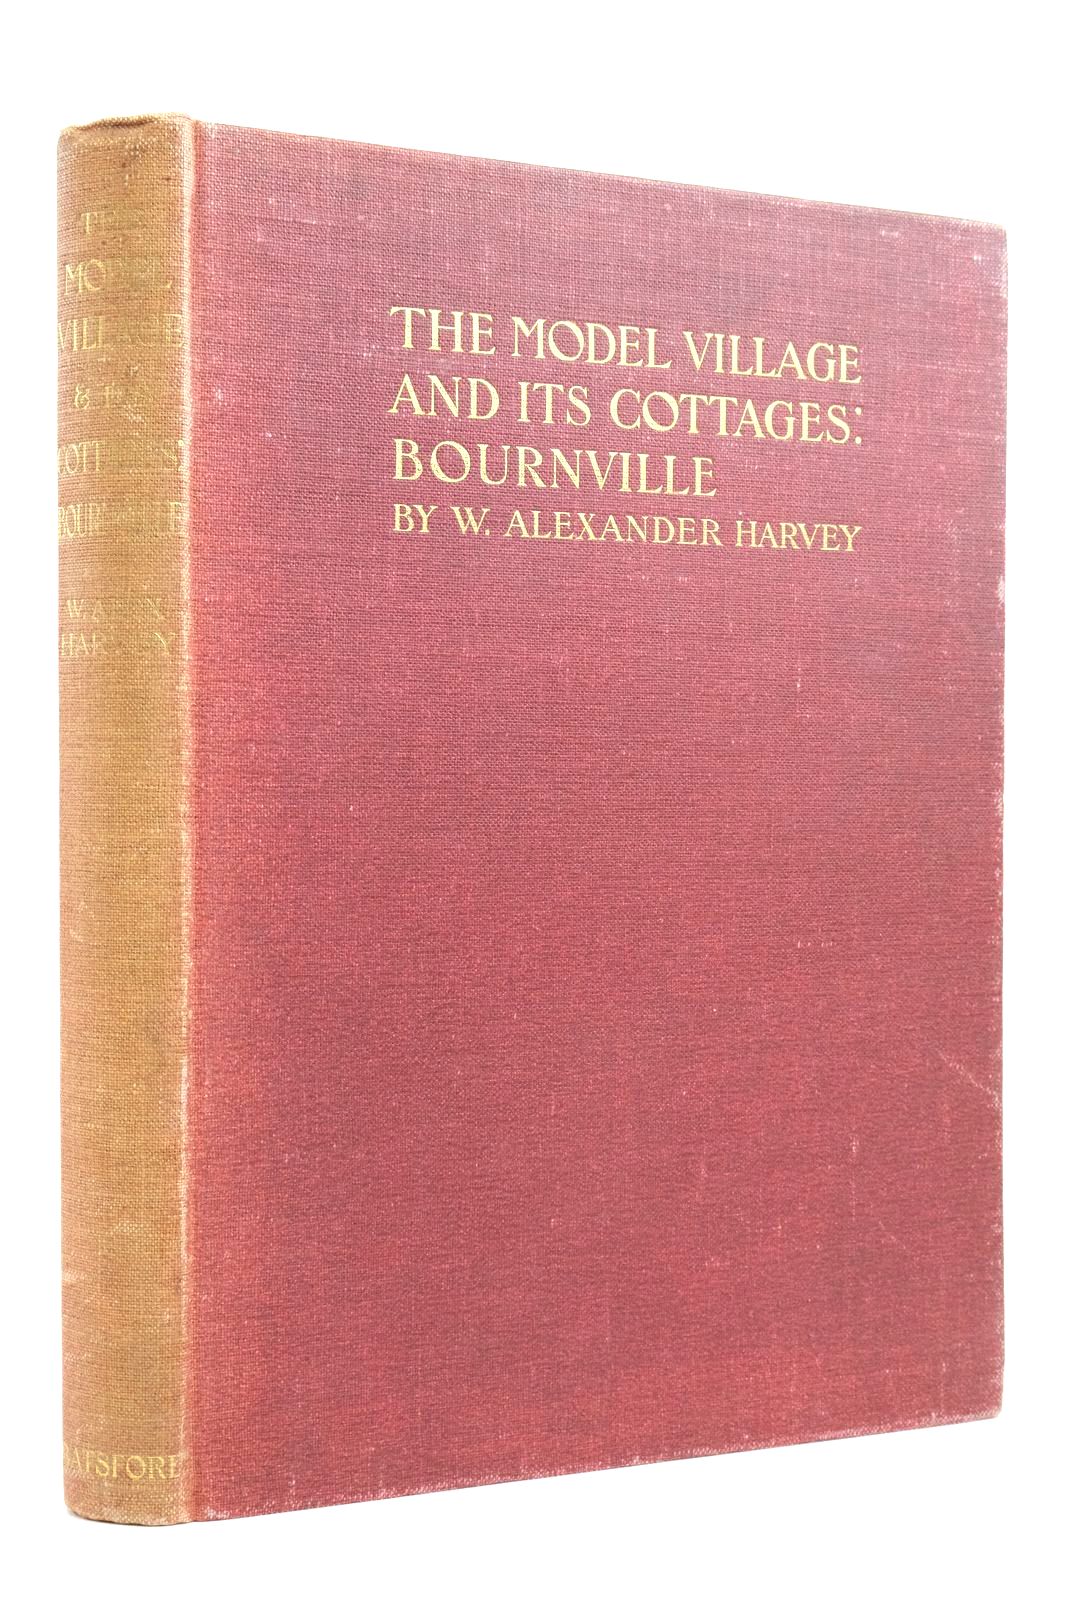 Photo of THE MODEL VILLAGE AND ITS COTTAGES: BOURNVILLE- Stock Number: 2136428